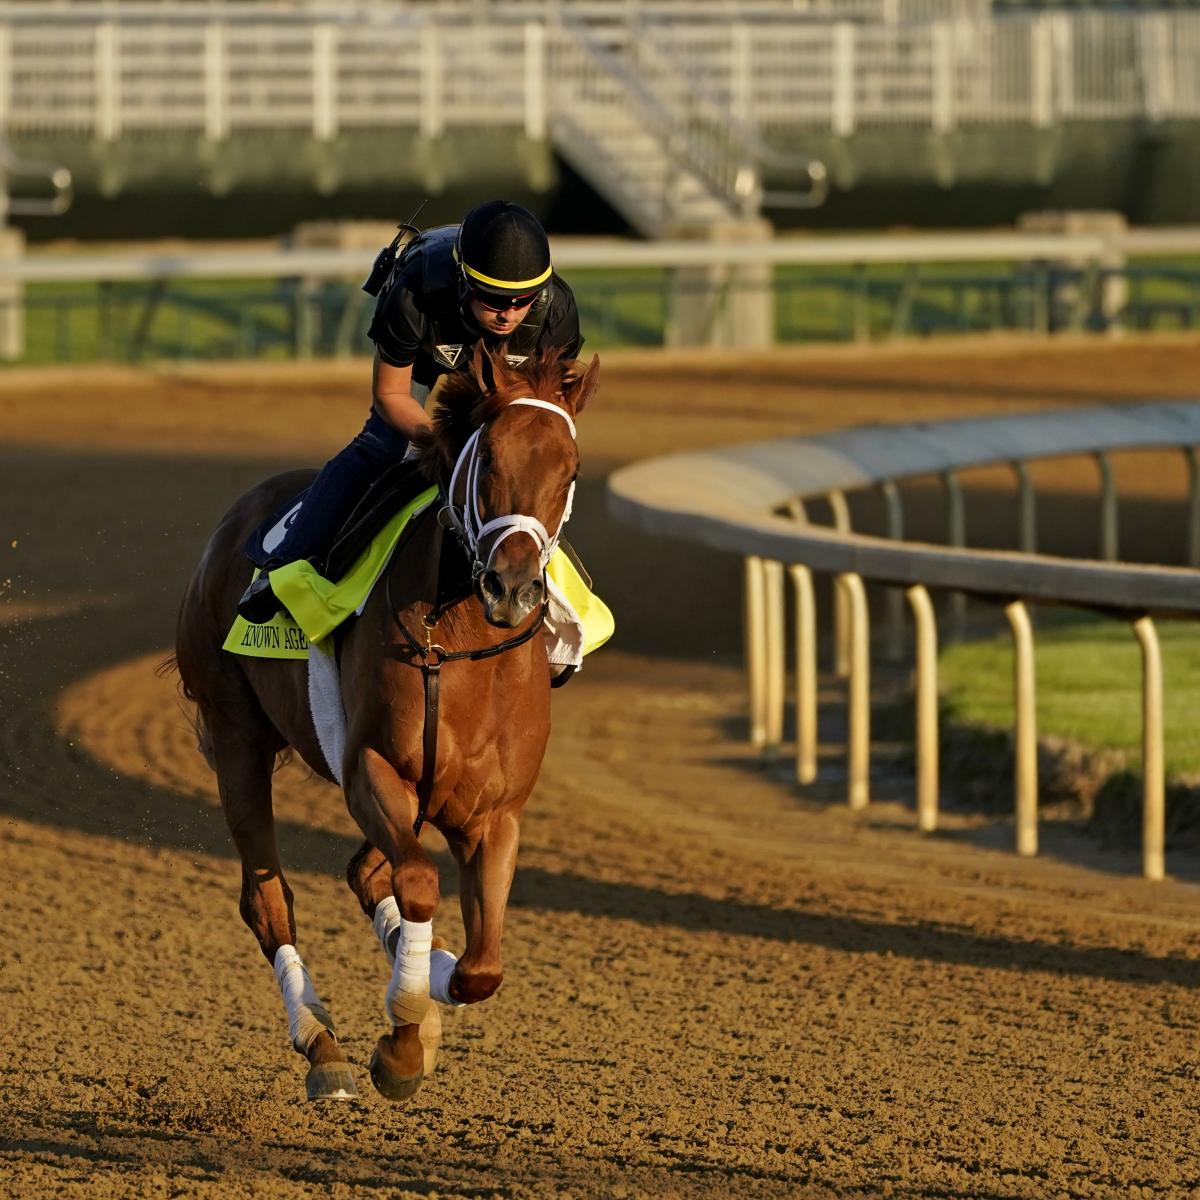 Kentucky Derby Entries 2021 Horses in the Field Best Suited for